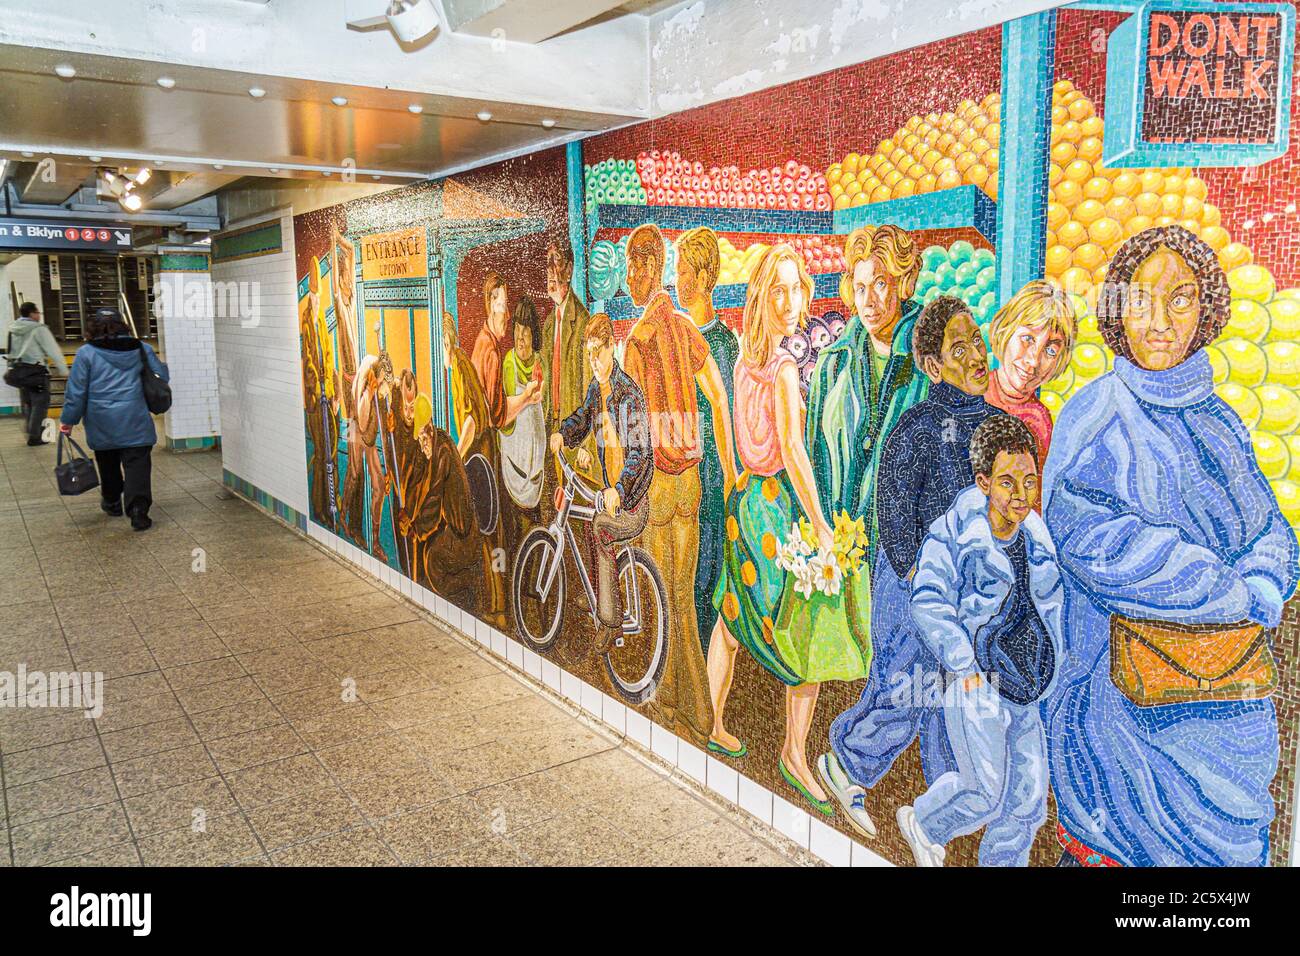 New York City,NYC NY Manhattan,Midtown,MTA,New York City,Subway system,Times Square Station,1 2 3 N Q R S highway Route,glass mosaic mural,Jack Beal,a Stock Photo